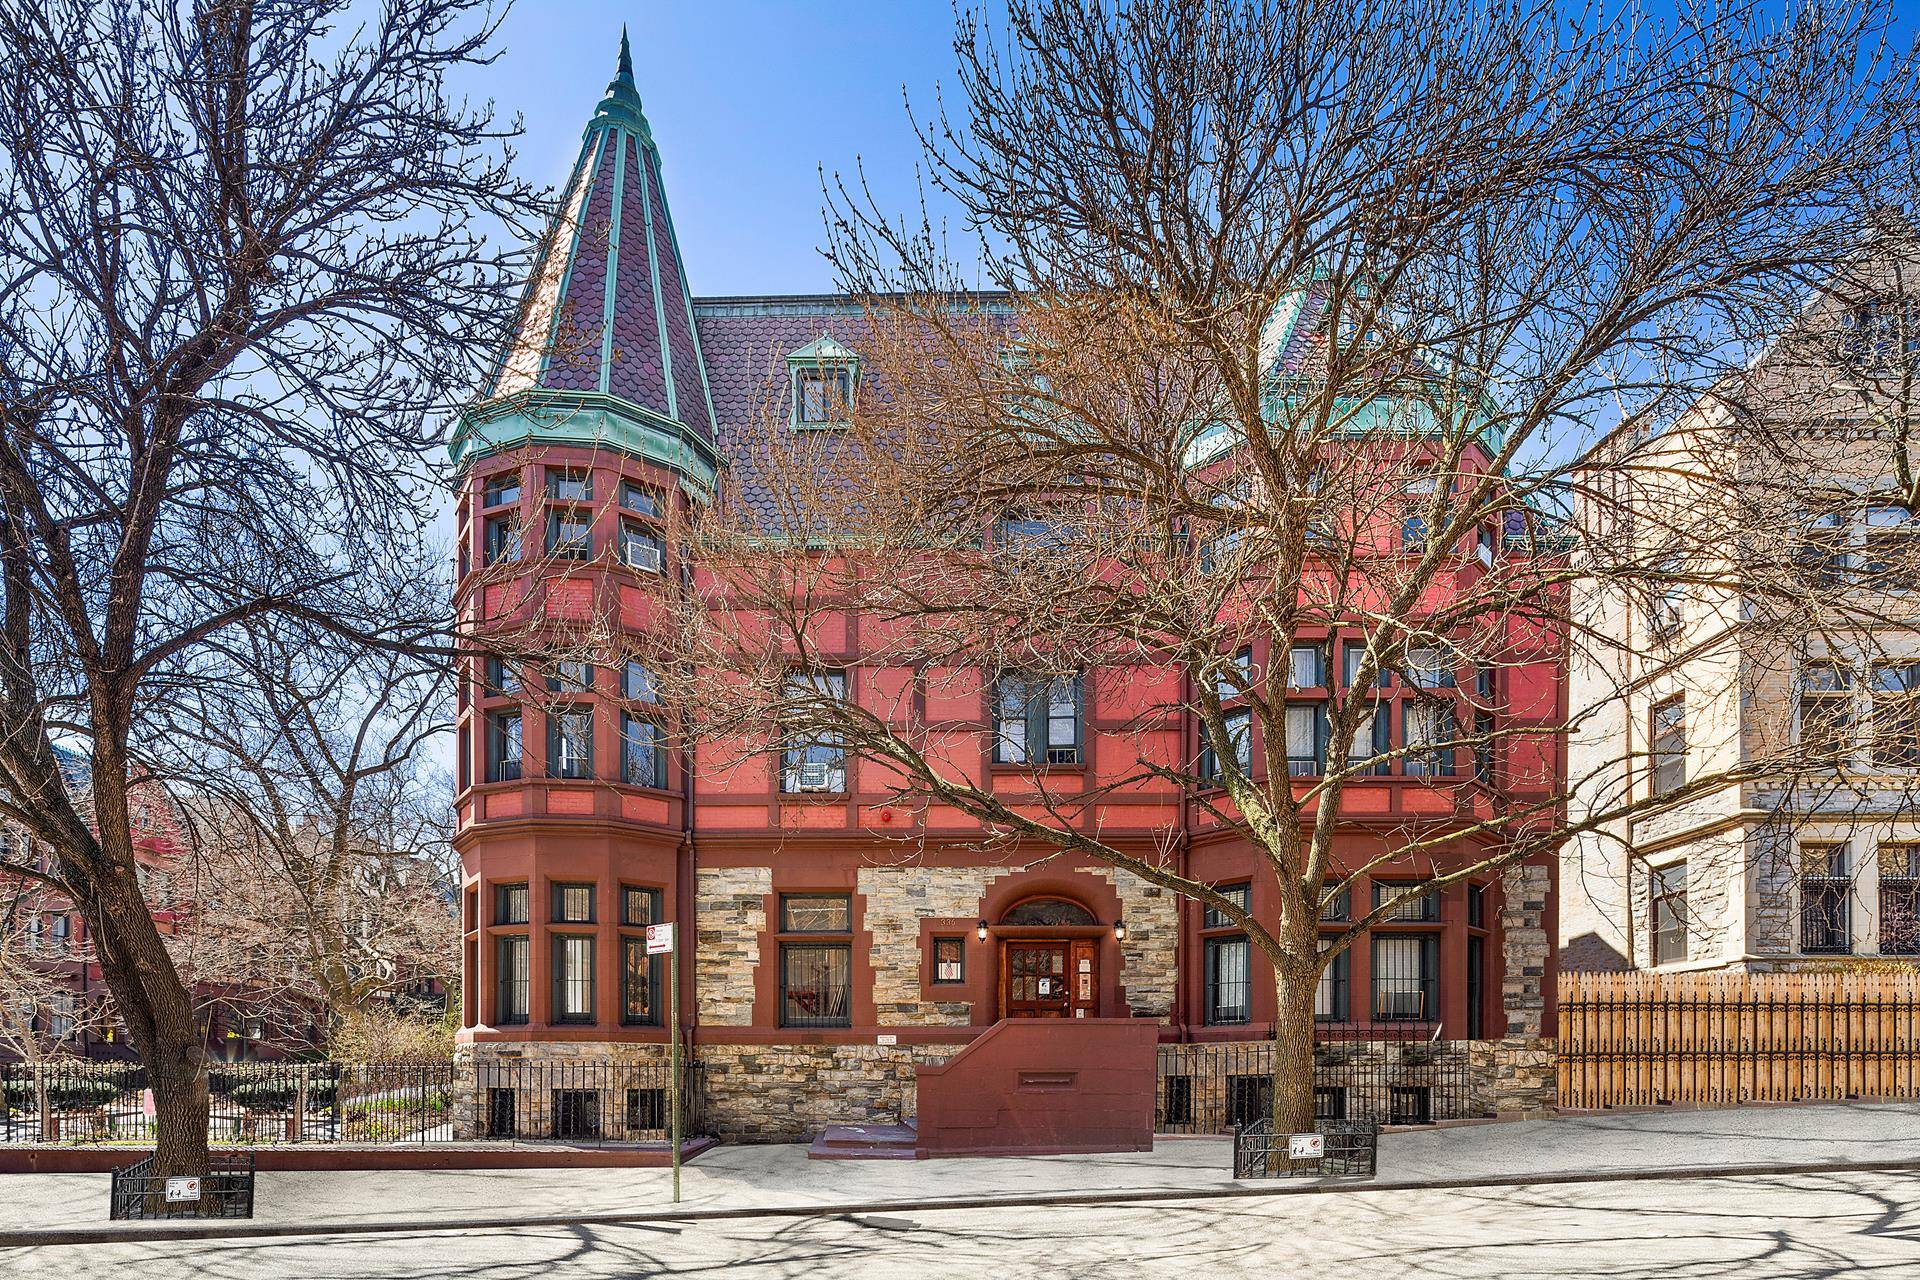 CASTLE ON CONVENT... Located on the picturesque tree lined corner of Convent Avenue and W 144th Street this Queen Anne showpiece with its medieval faade dominated by a corner tower ...